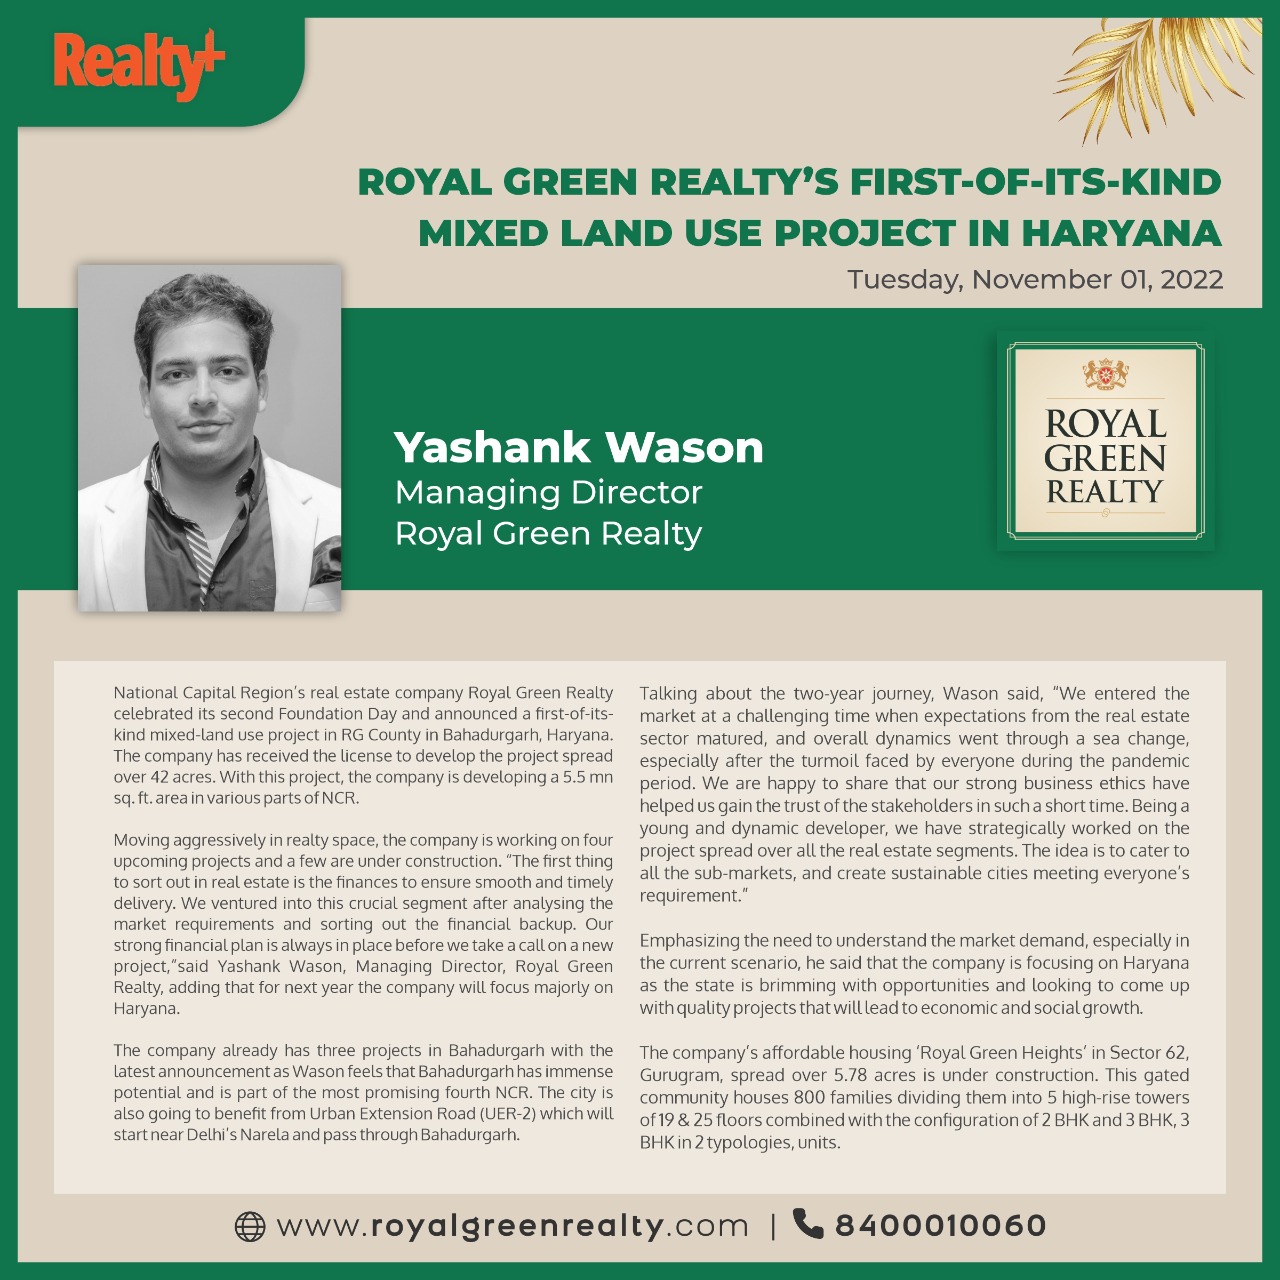 Royal Green Realty's First-of-its-kind Mixed Land Use Project in Haryana